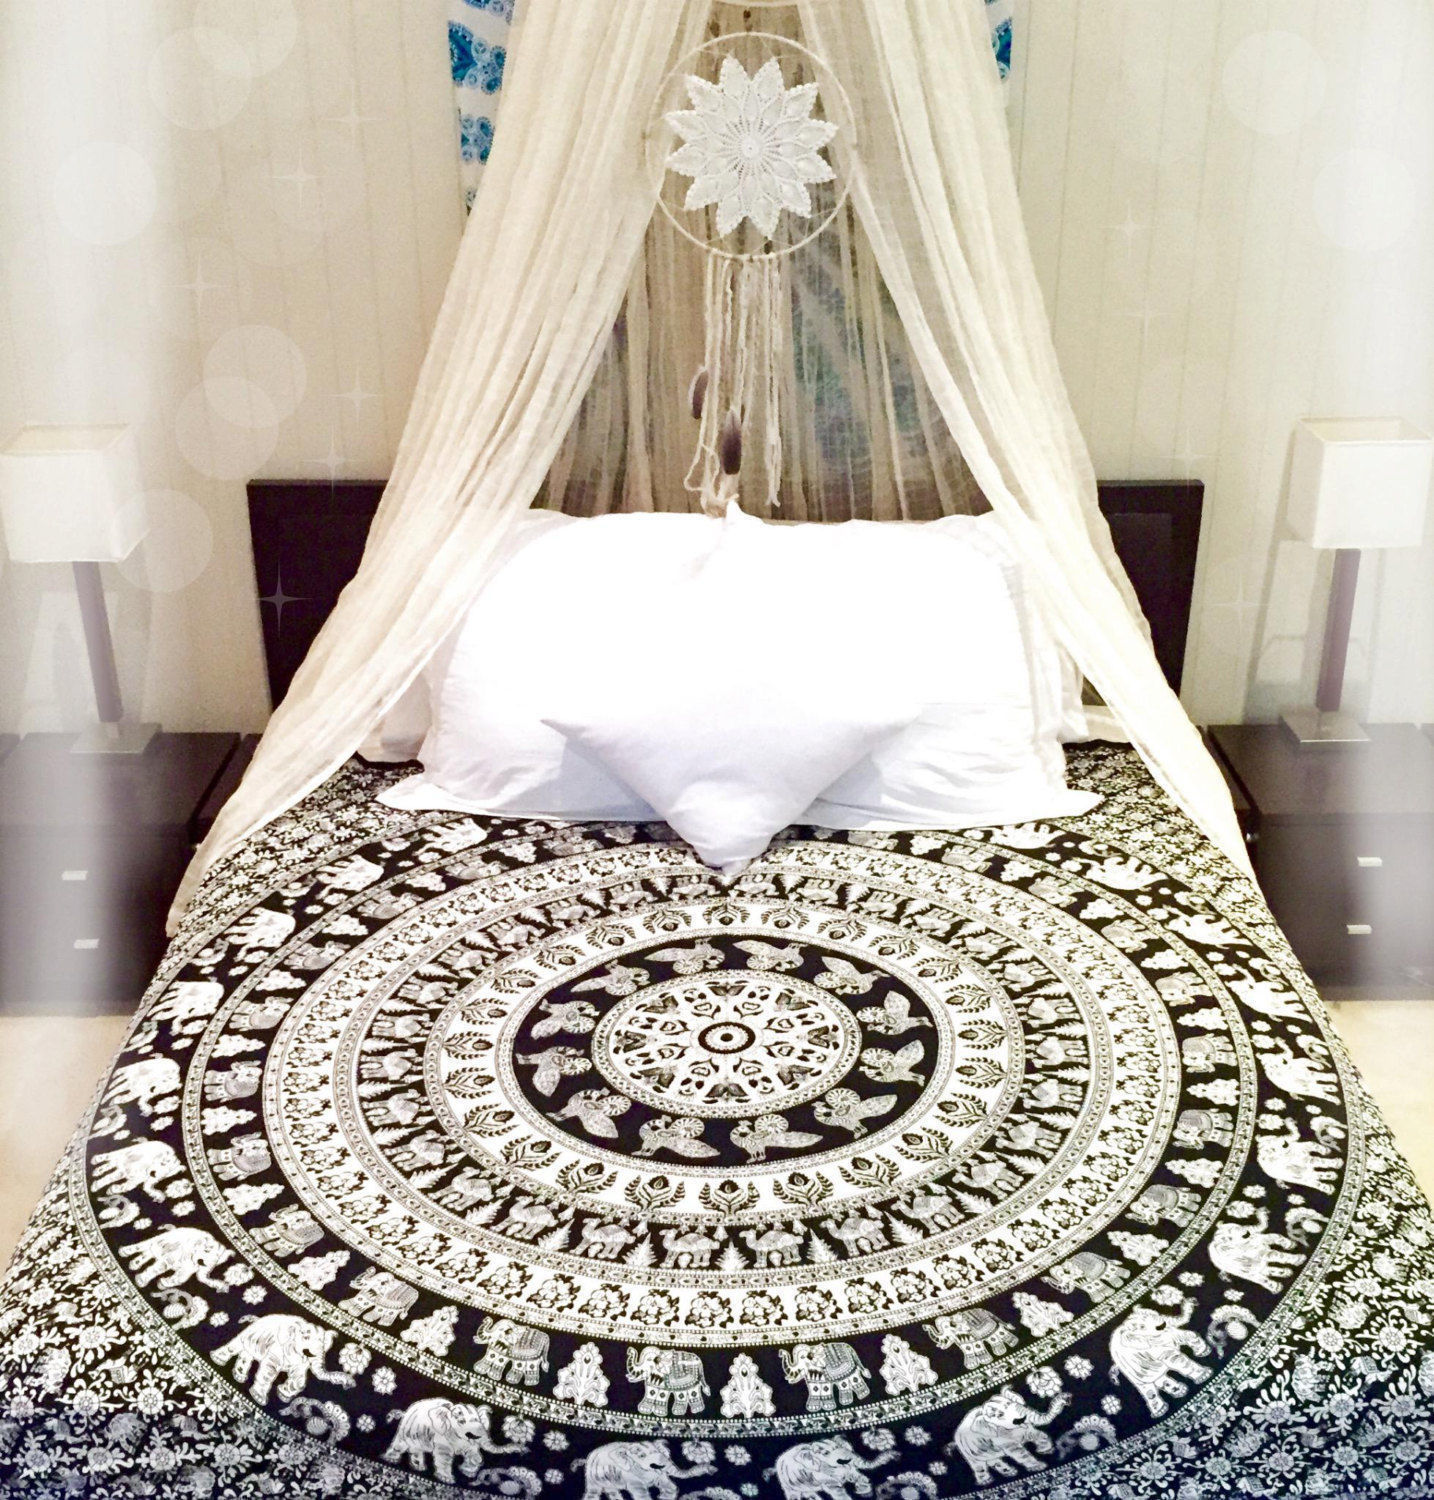 Hippie Mandala Tapestry Indian Elephant Bedspread Twin Black White Wall Hanging